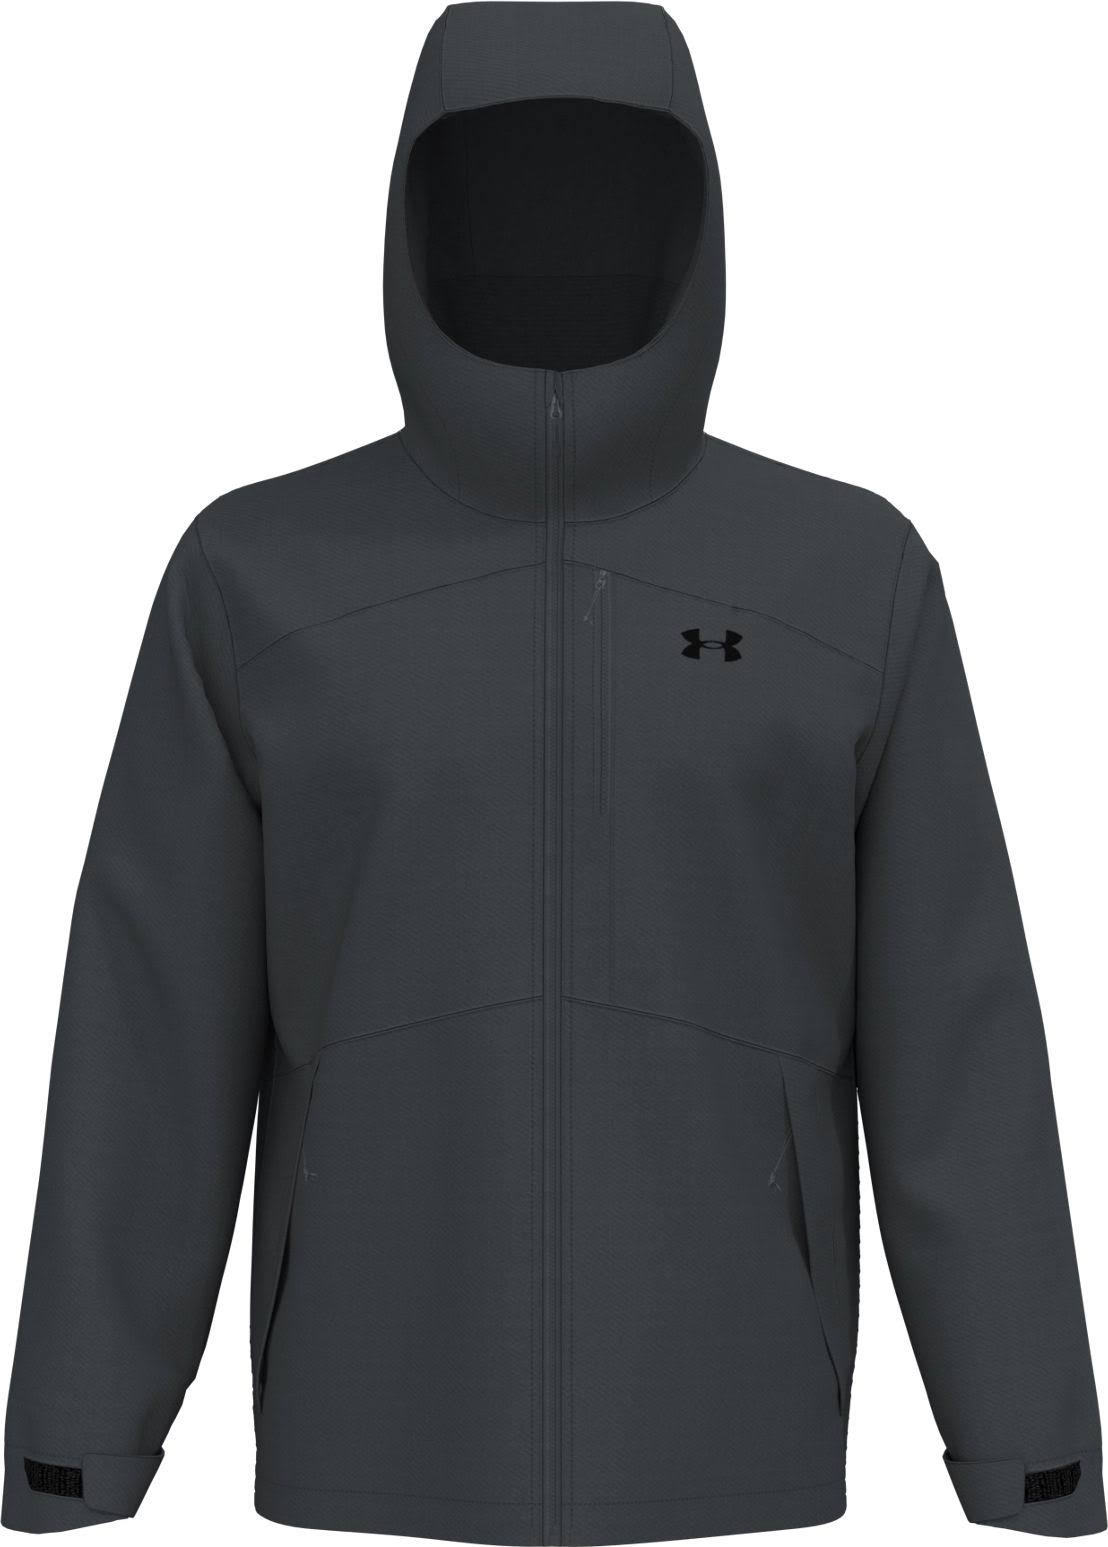 Under Armour Men's Porter 3-in-1 Jacket - Gray, MD